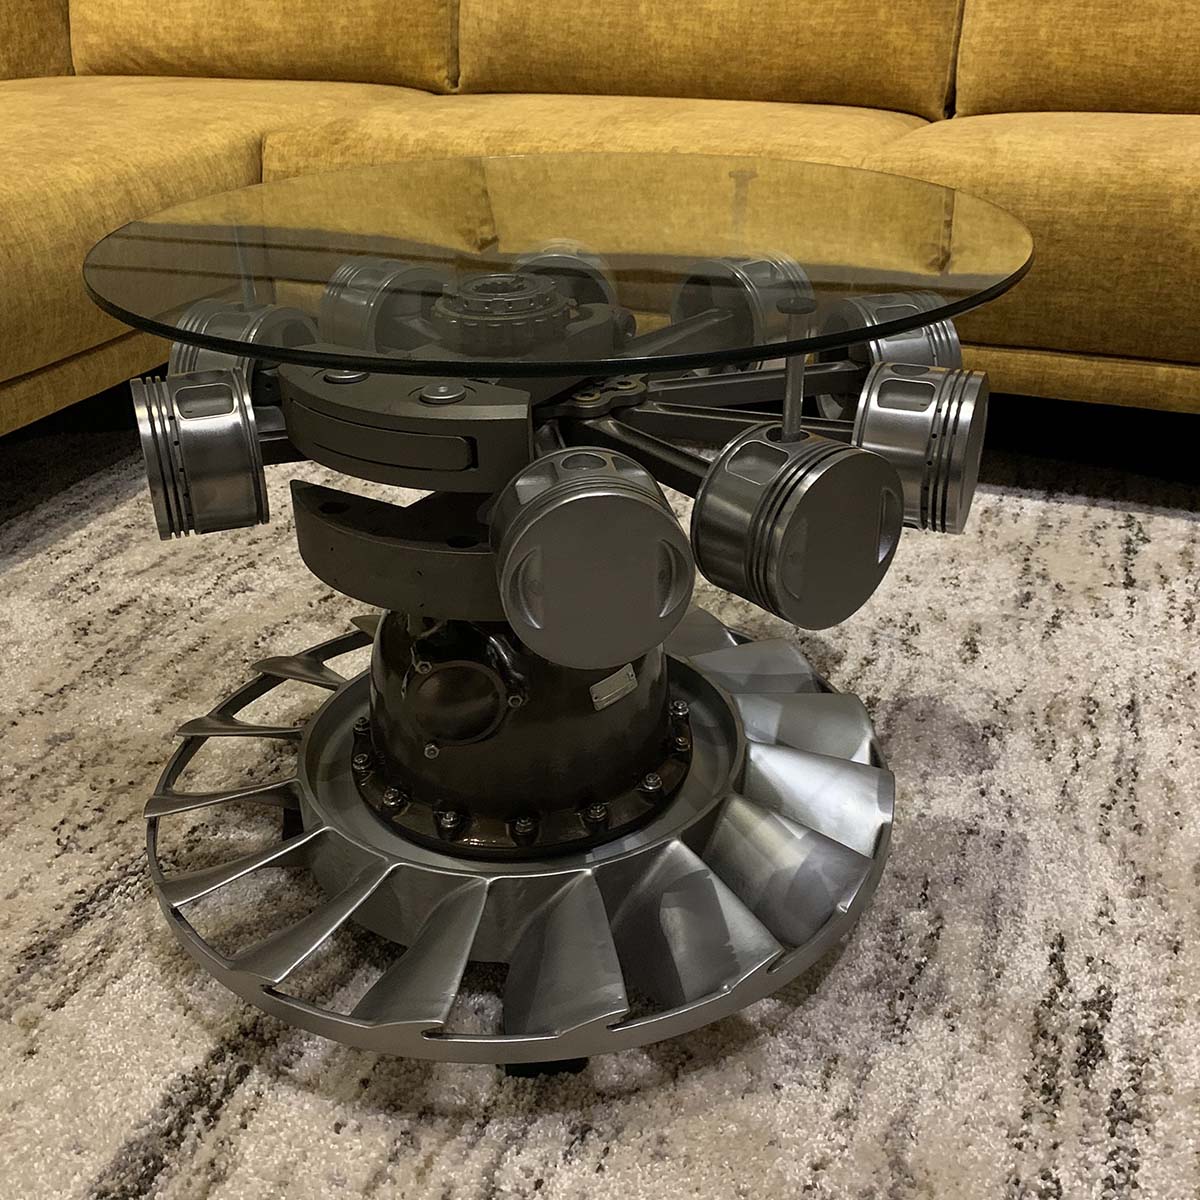 Table made from the engine of a Kamov-26 helicopter.